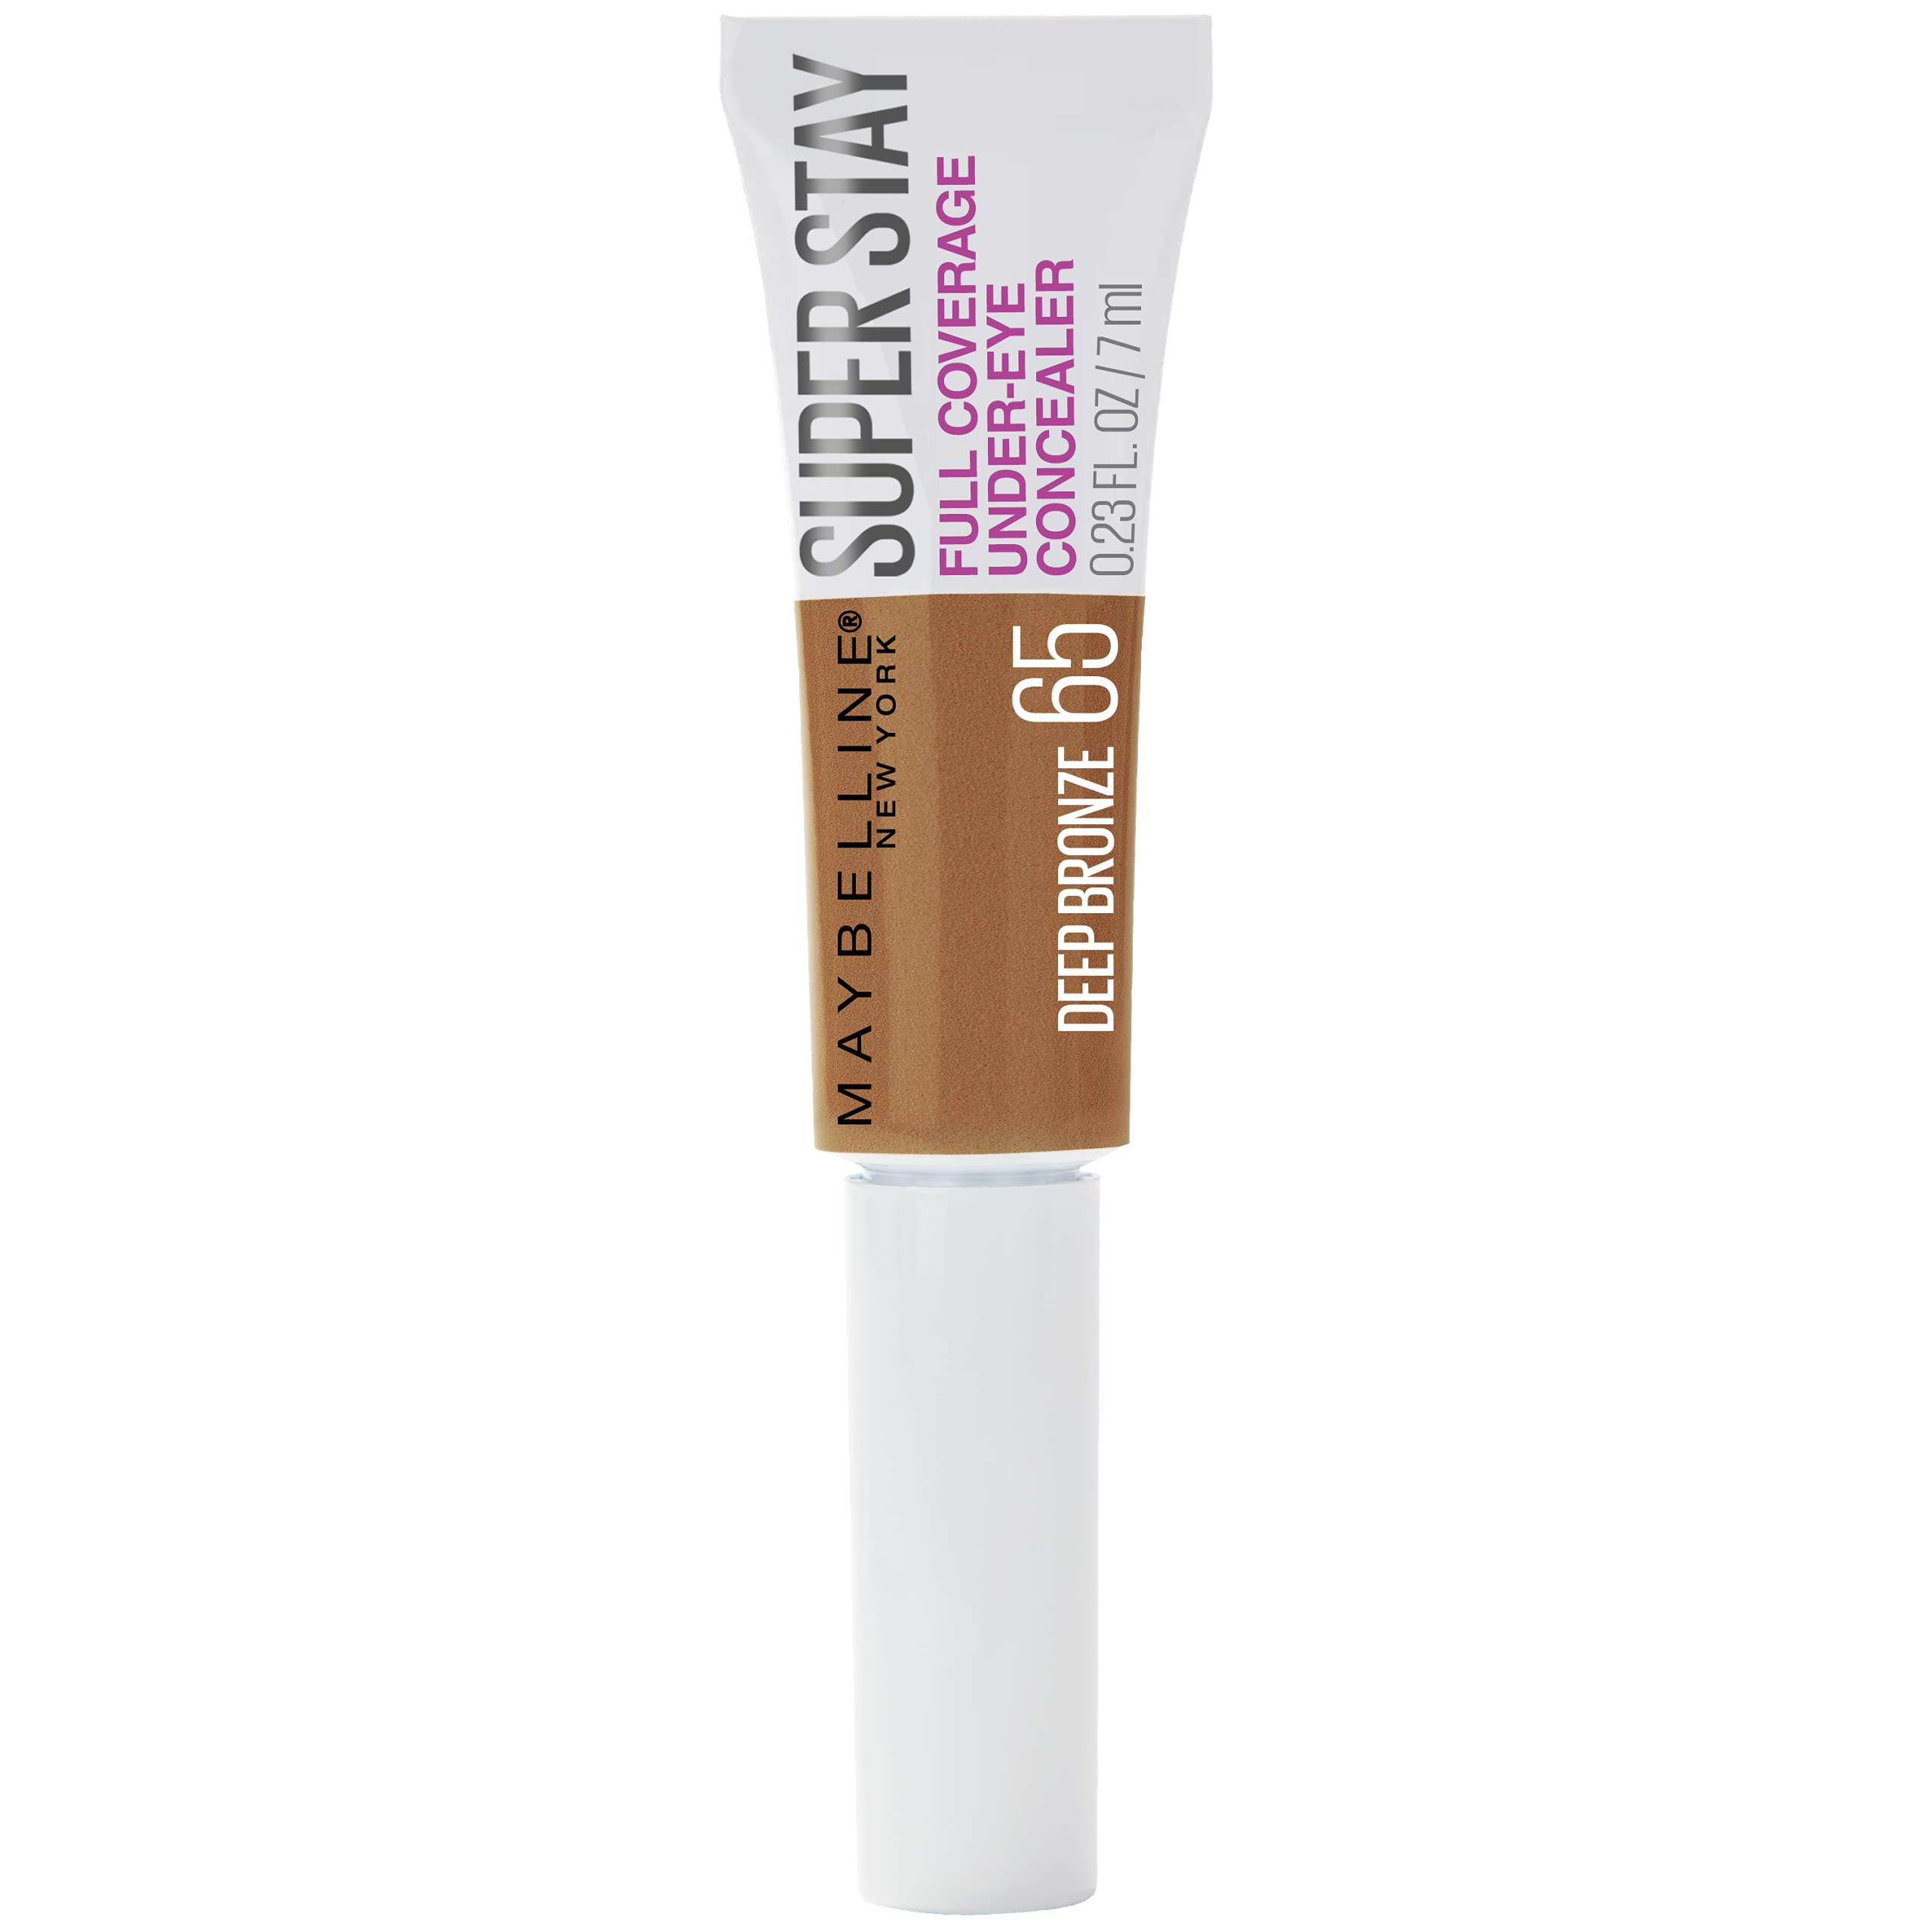 Maybelline New York Super Stay Super Stay Full Coverage, Brightening, Long Lasting, Under-eye Concealer Liquid Makeup For Up To 24H Wear, With Paddle Applicator, Deep Bronze, 0.23 fl. oz., 65 Deep Bronze